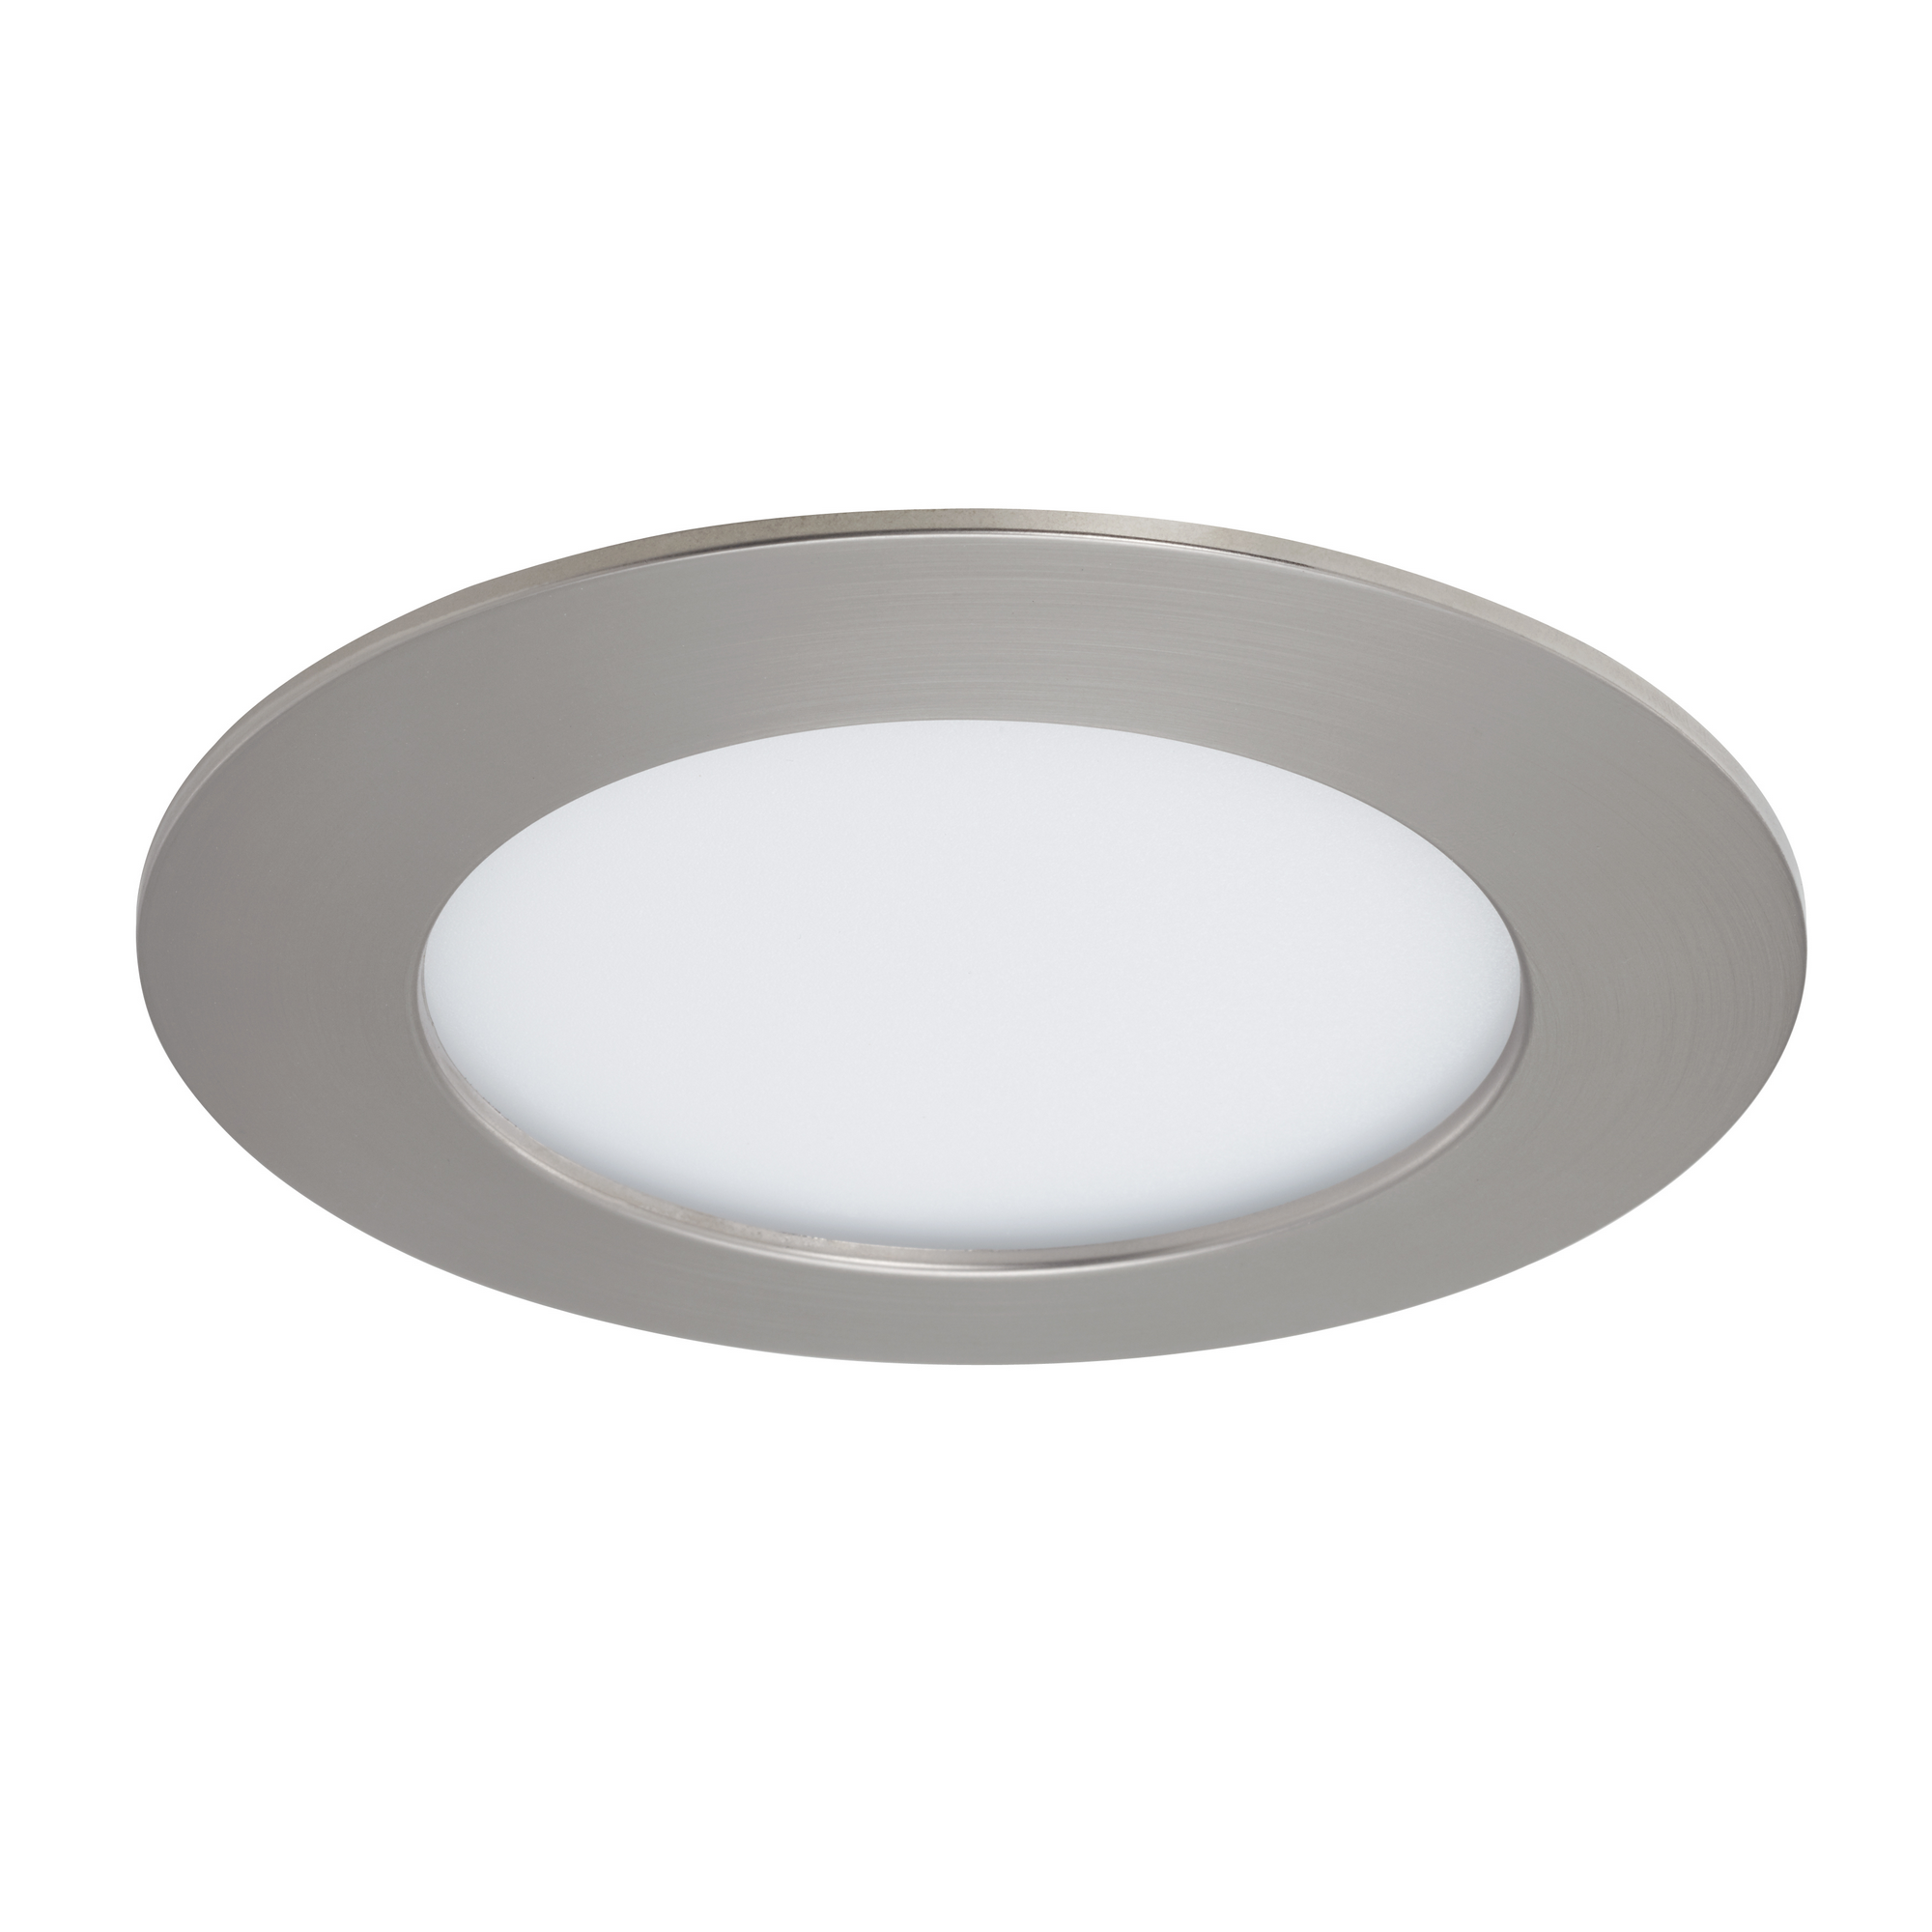 LED-Einbauleuchtenset 'Flat In' 800 lm 8 W 3 Stk. Bad + product picture